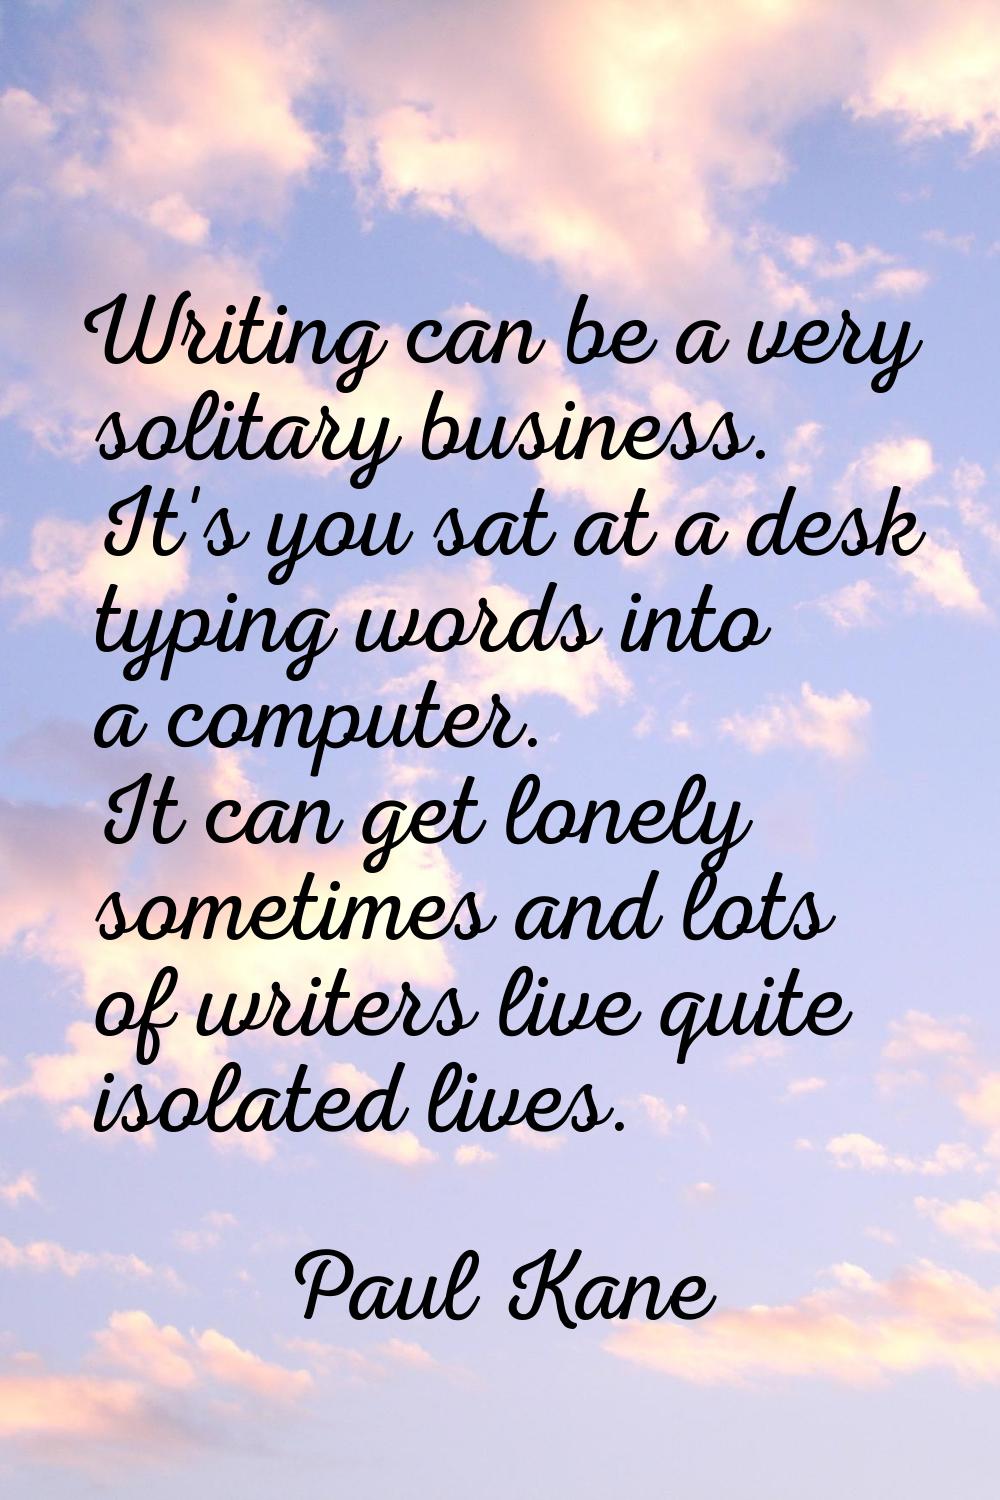 Writing can be a very solitary business. It's you sat at a desk typing words into a computer. It ca